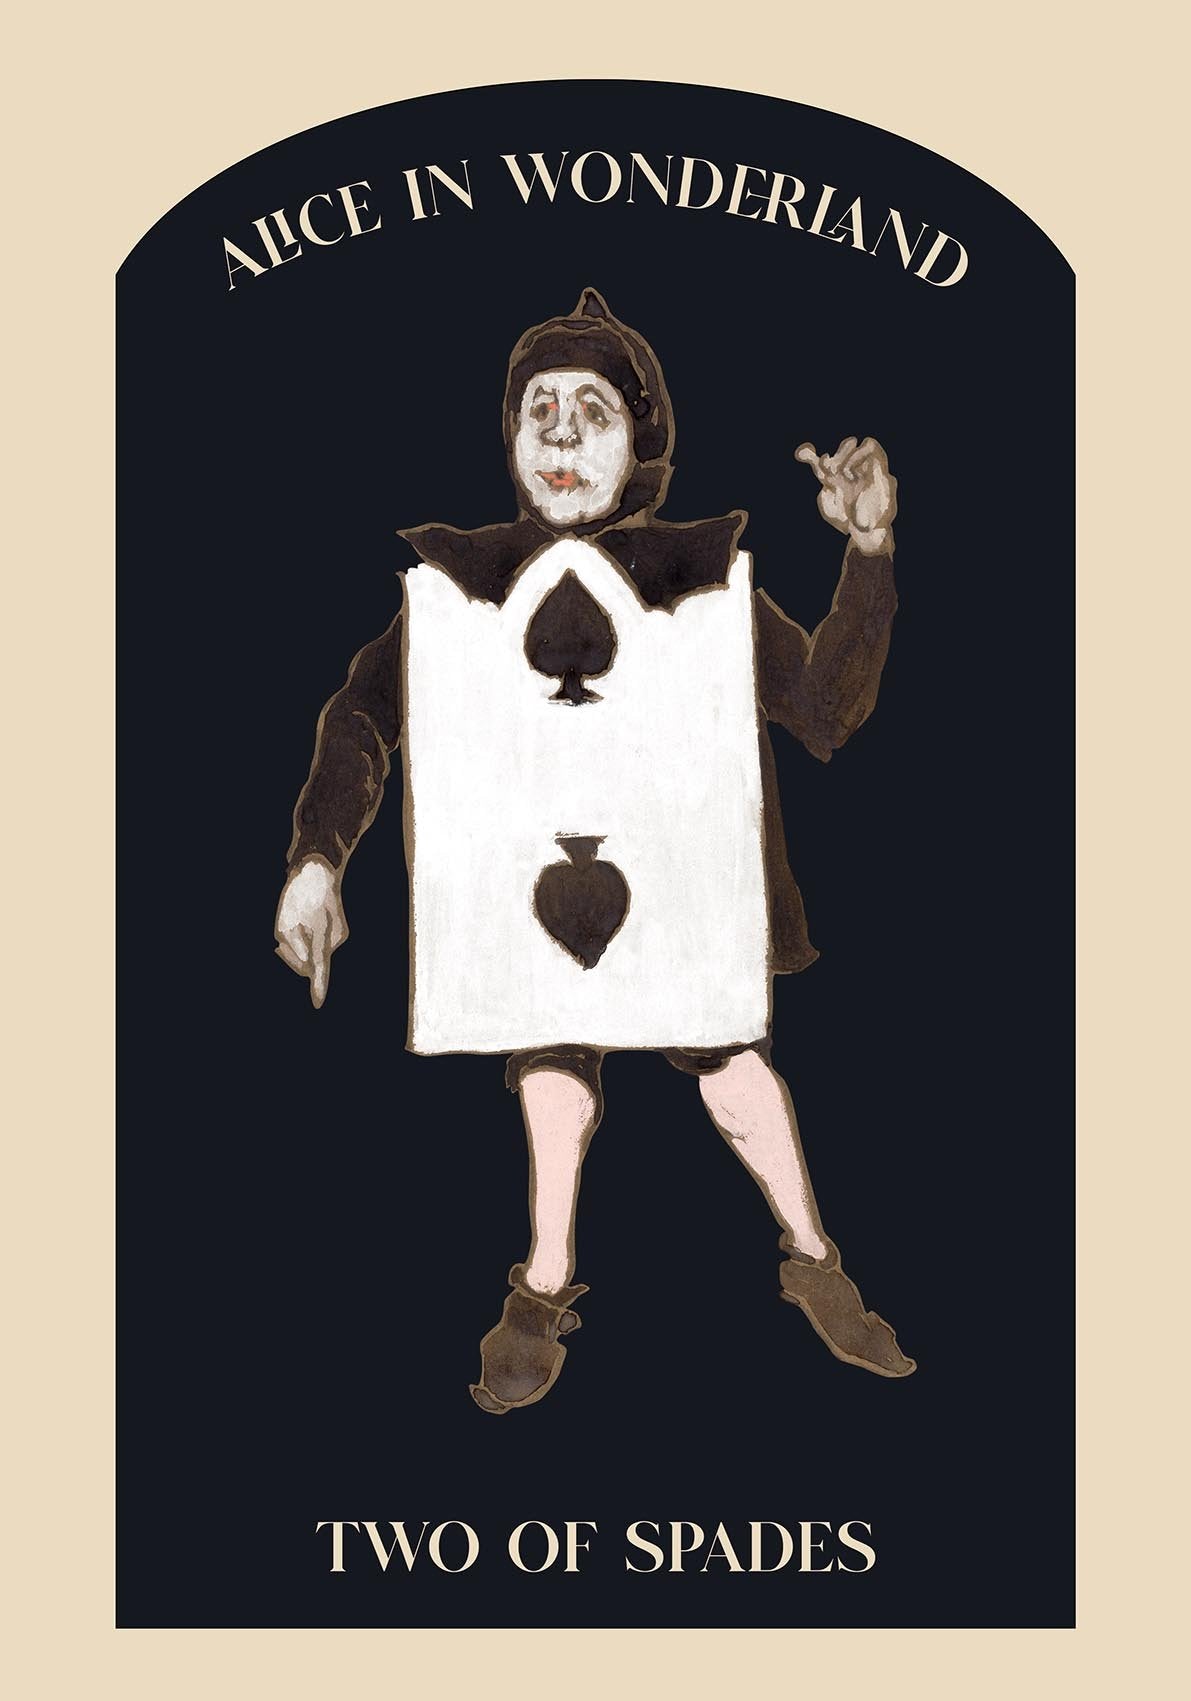 Two of Spades from Alice in Wonderland